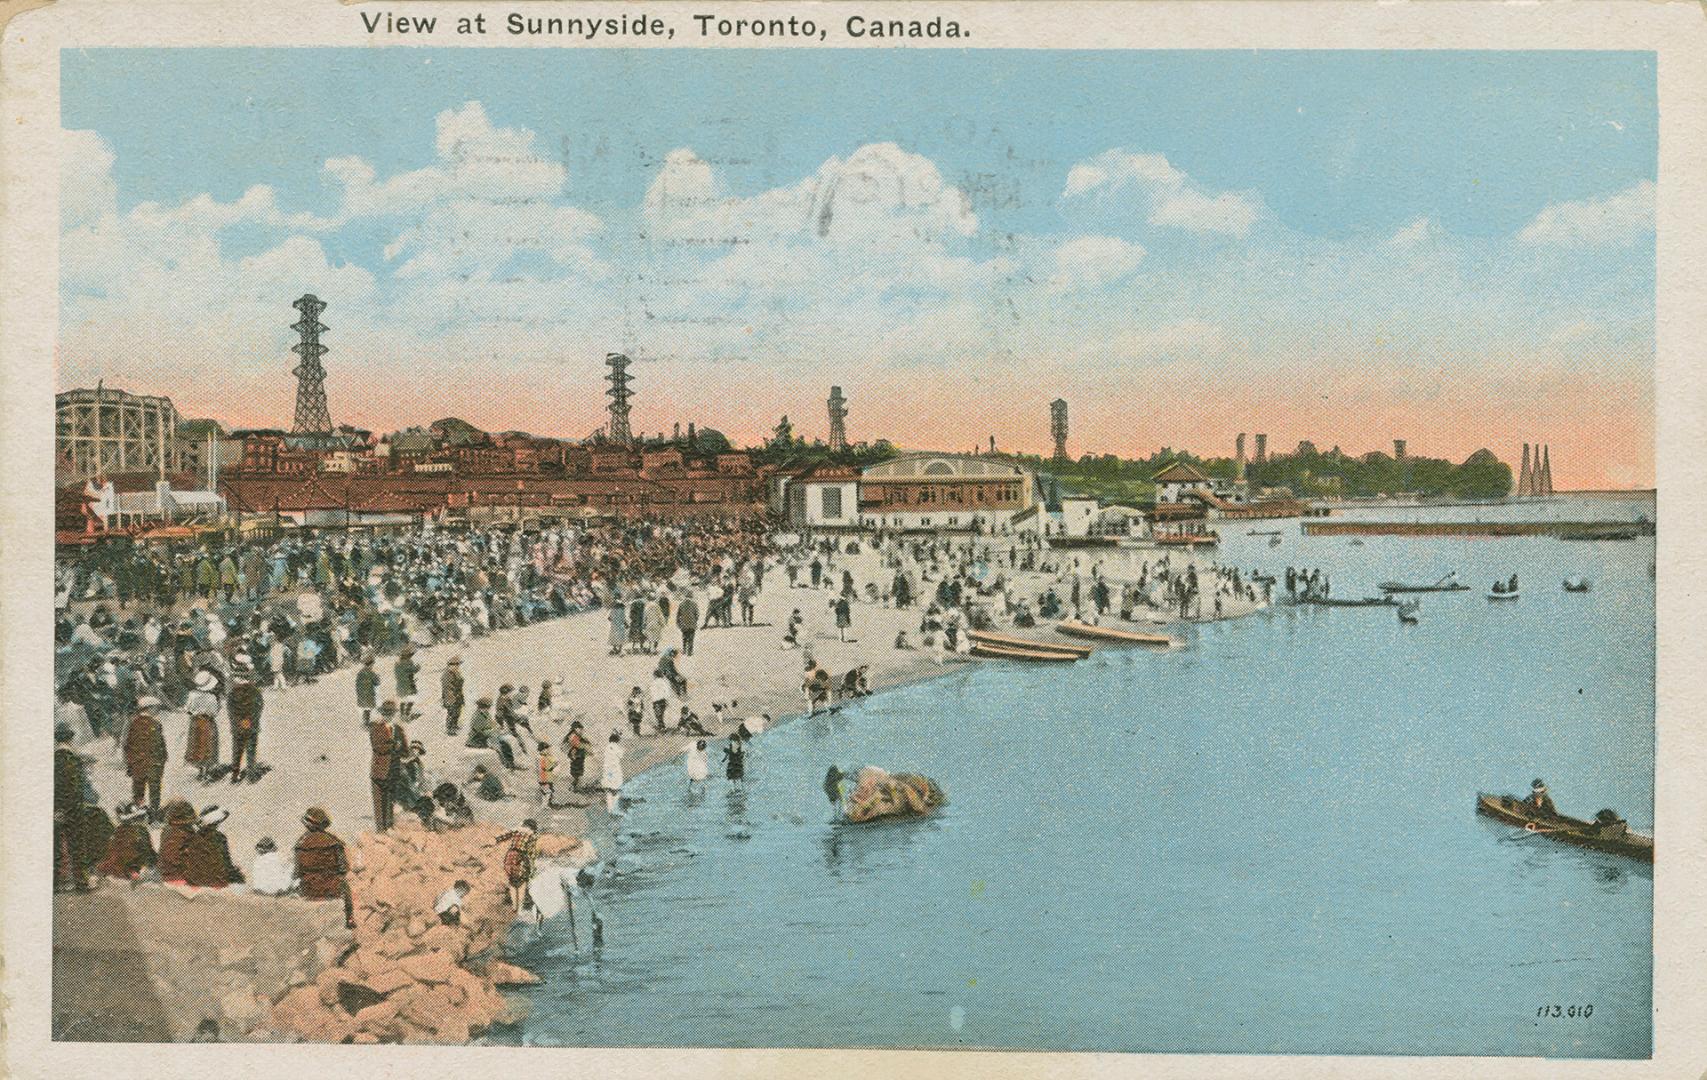 A beach crowded with people and amusement park and buildings in background. 